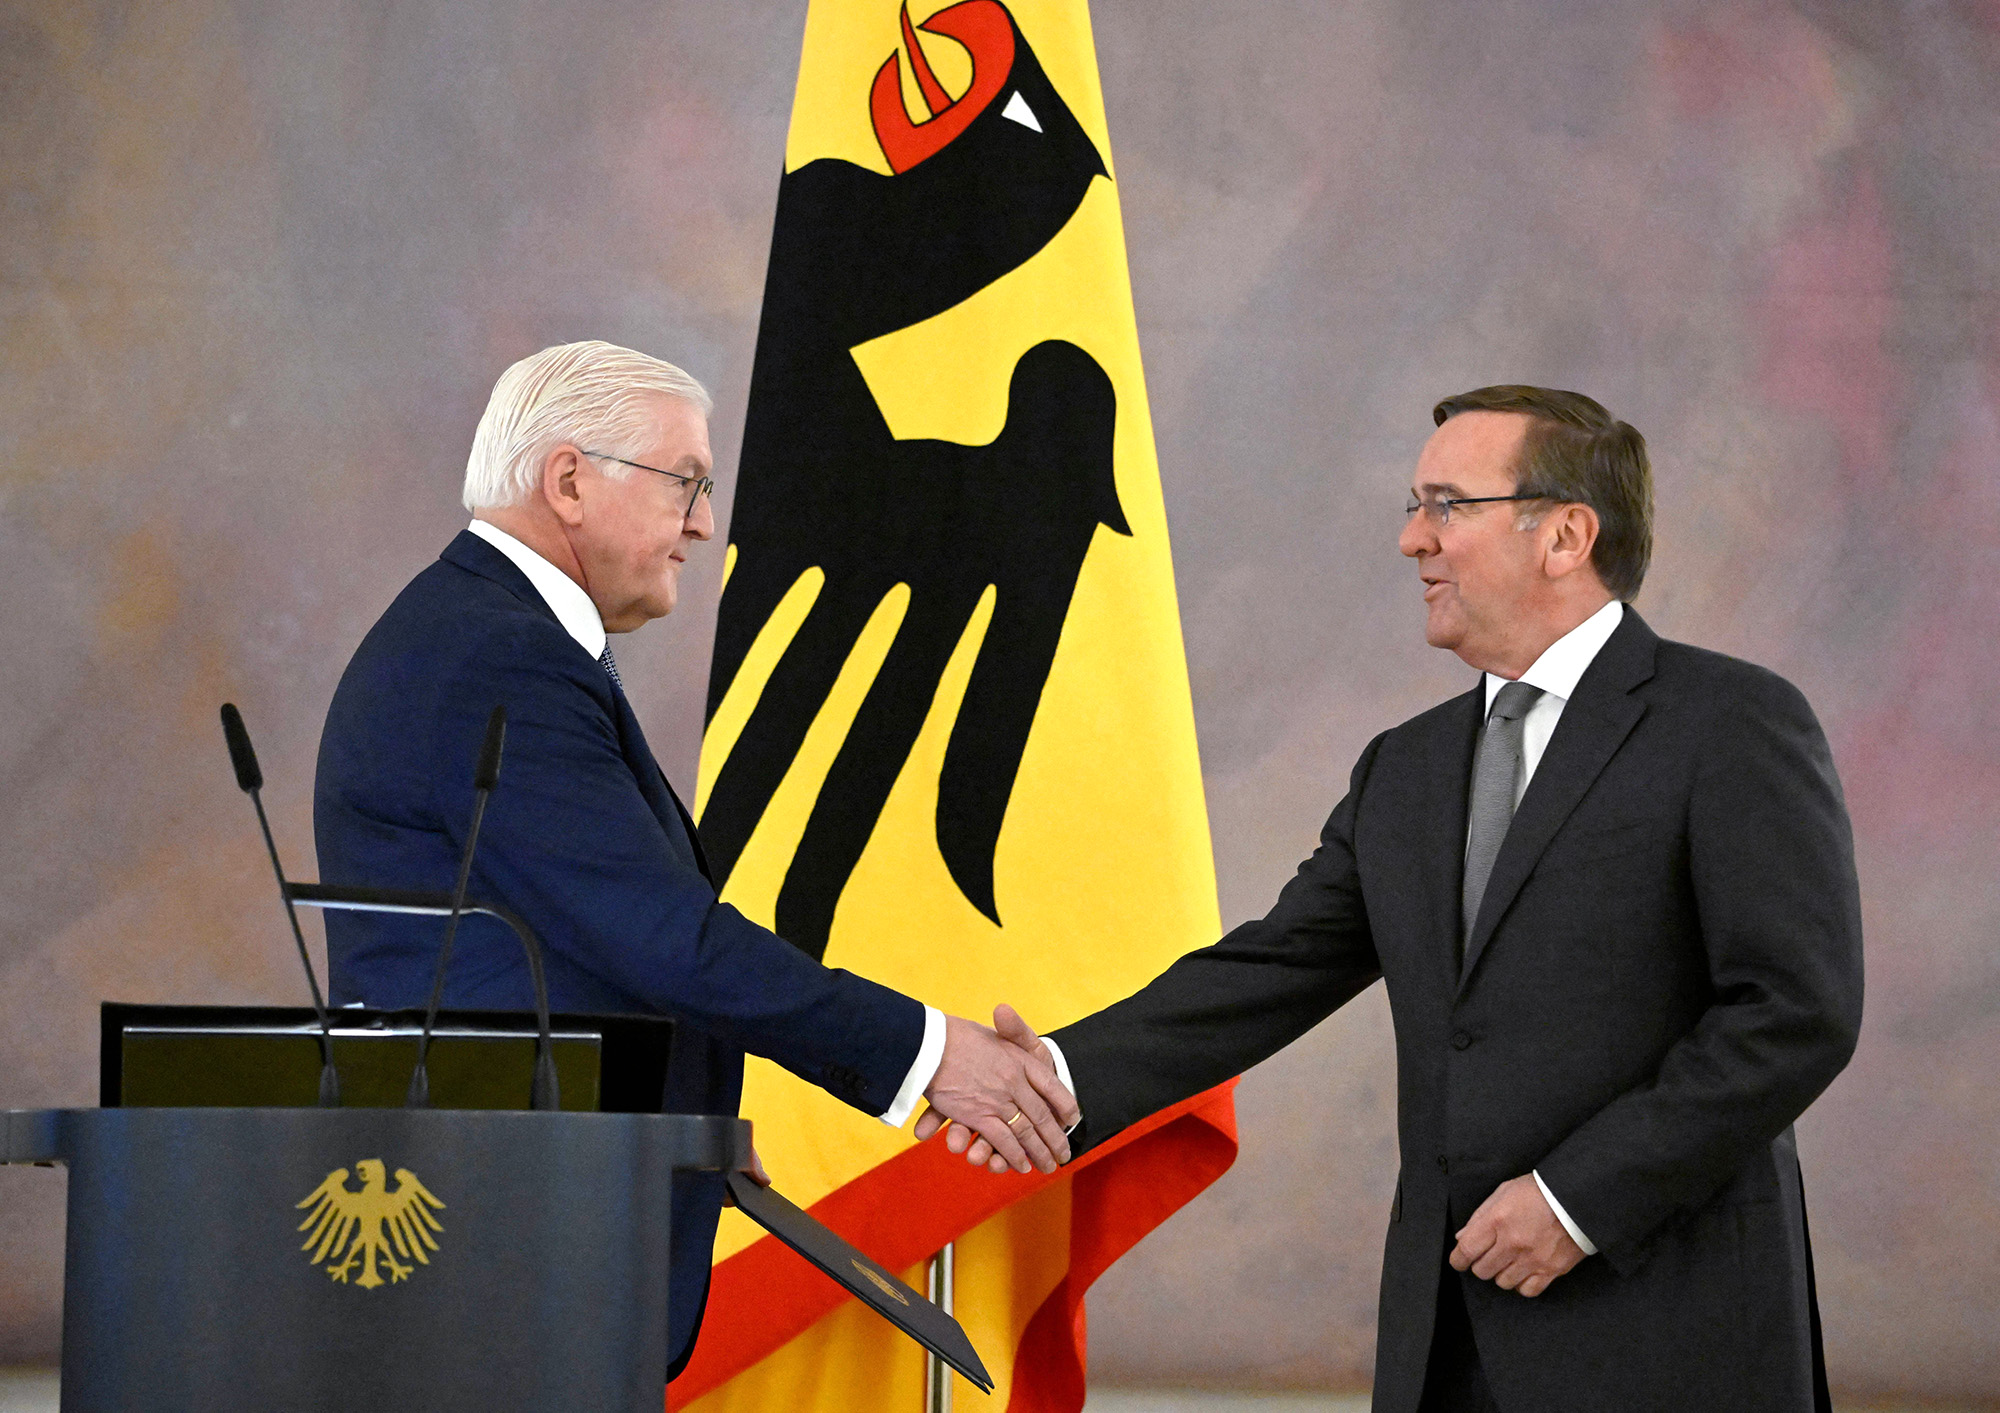 German President Frank-Walter Steinmeier, left, shakes hands with Germany's new Defense Minister Boris Pistorius as he hands him over the certificate of appointment at the presidential Bellevue Palace in Berlin on January 19.